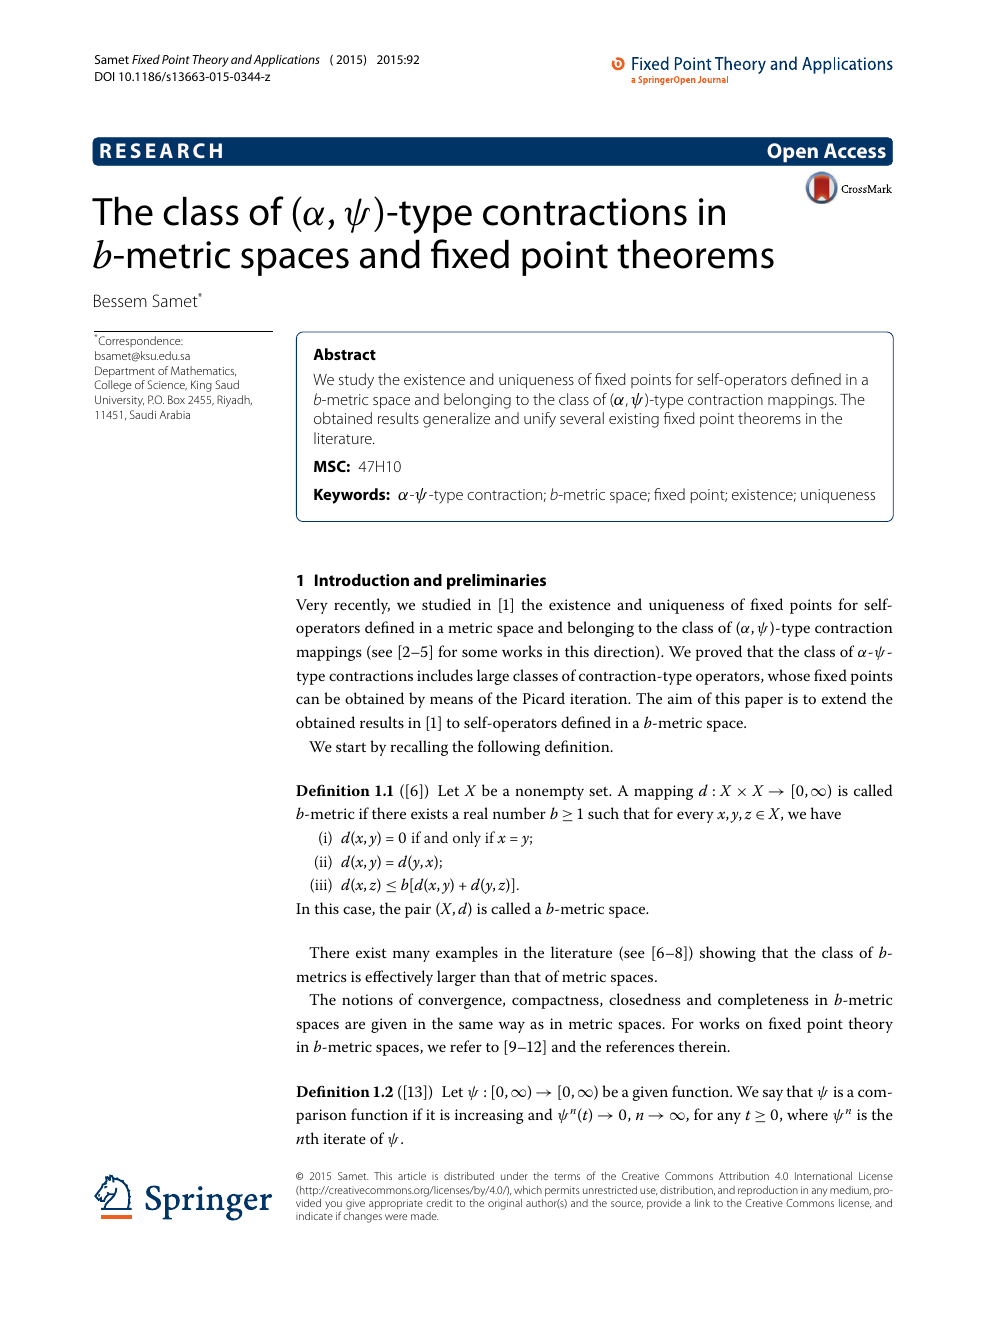 The Class Of A Ps Alpha Psi Type Contractions In B Metric Spaces And Fixed Point Theorems Topic Of Research Paper In Mathematics Download Scholarly Article Pdf And Read For